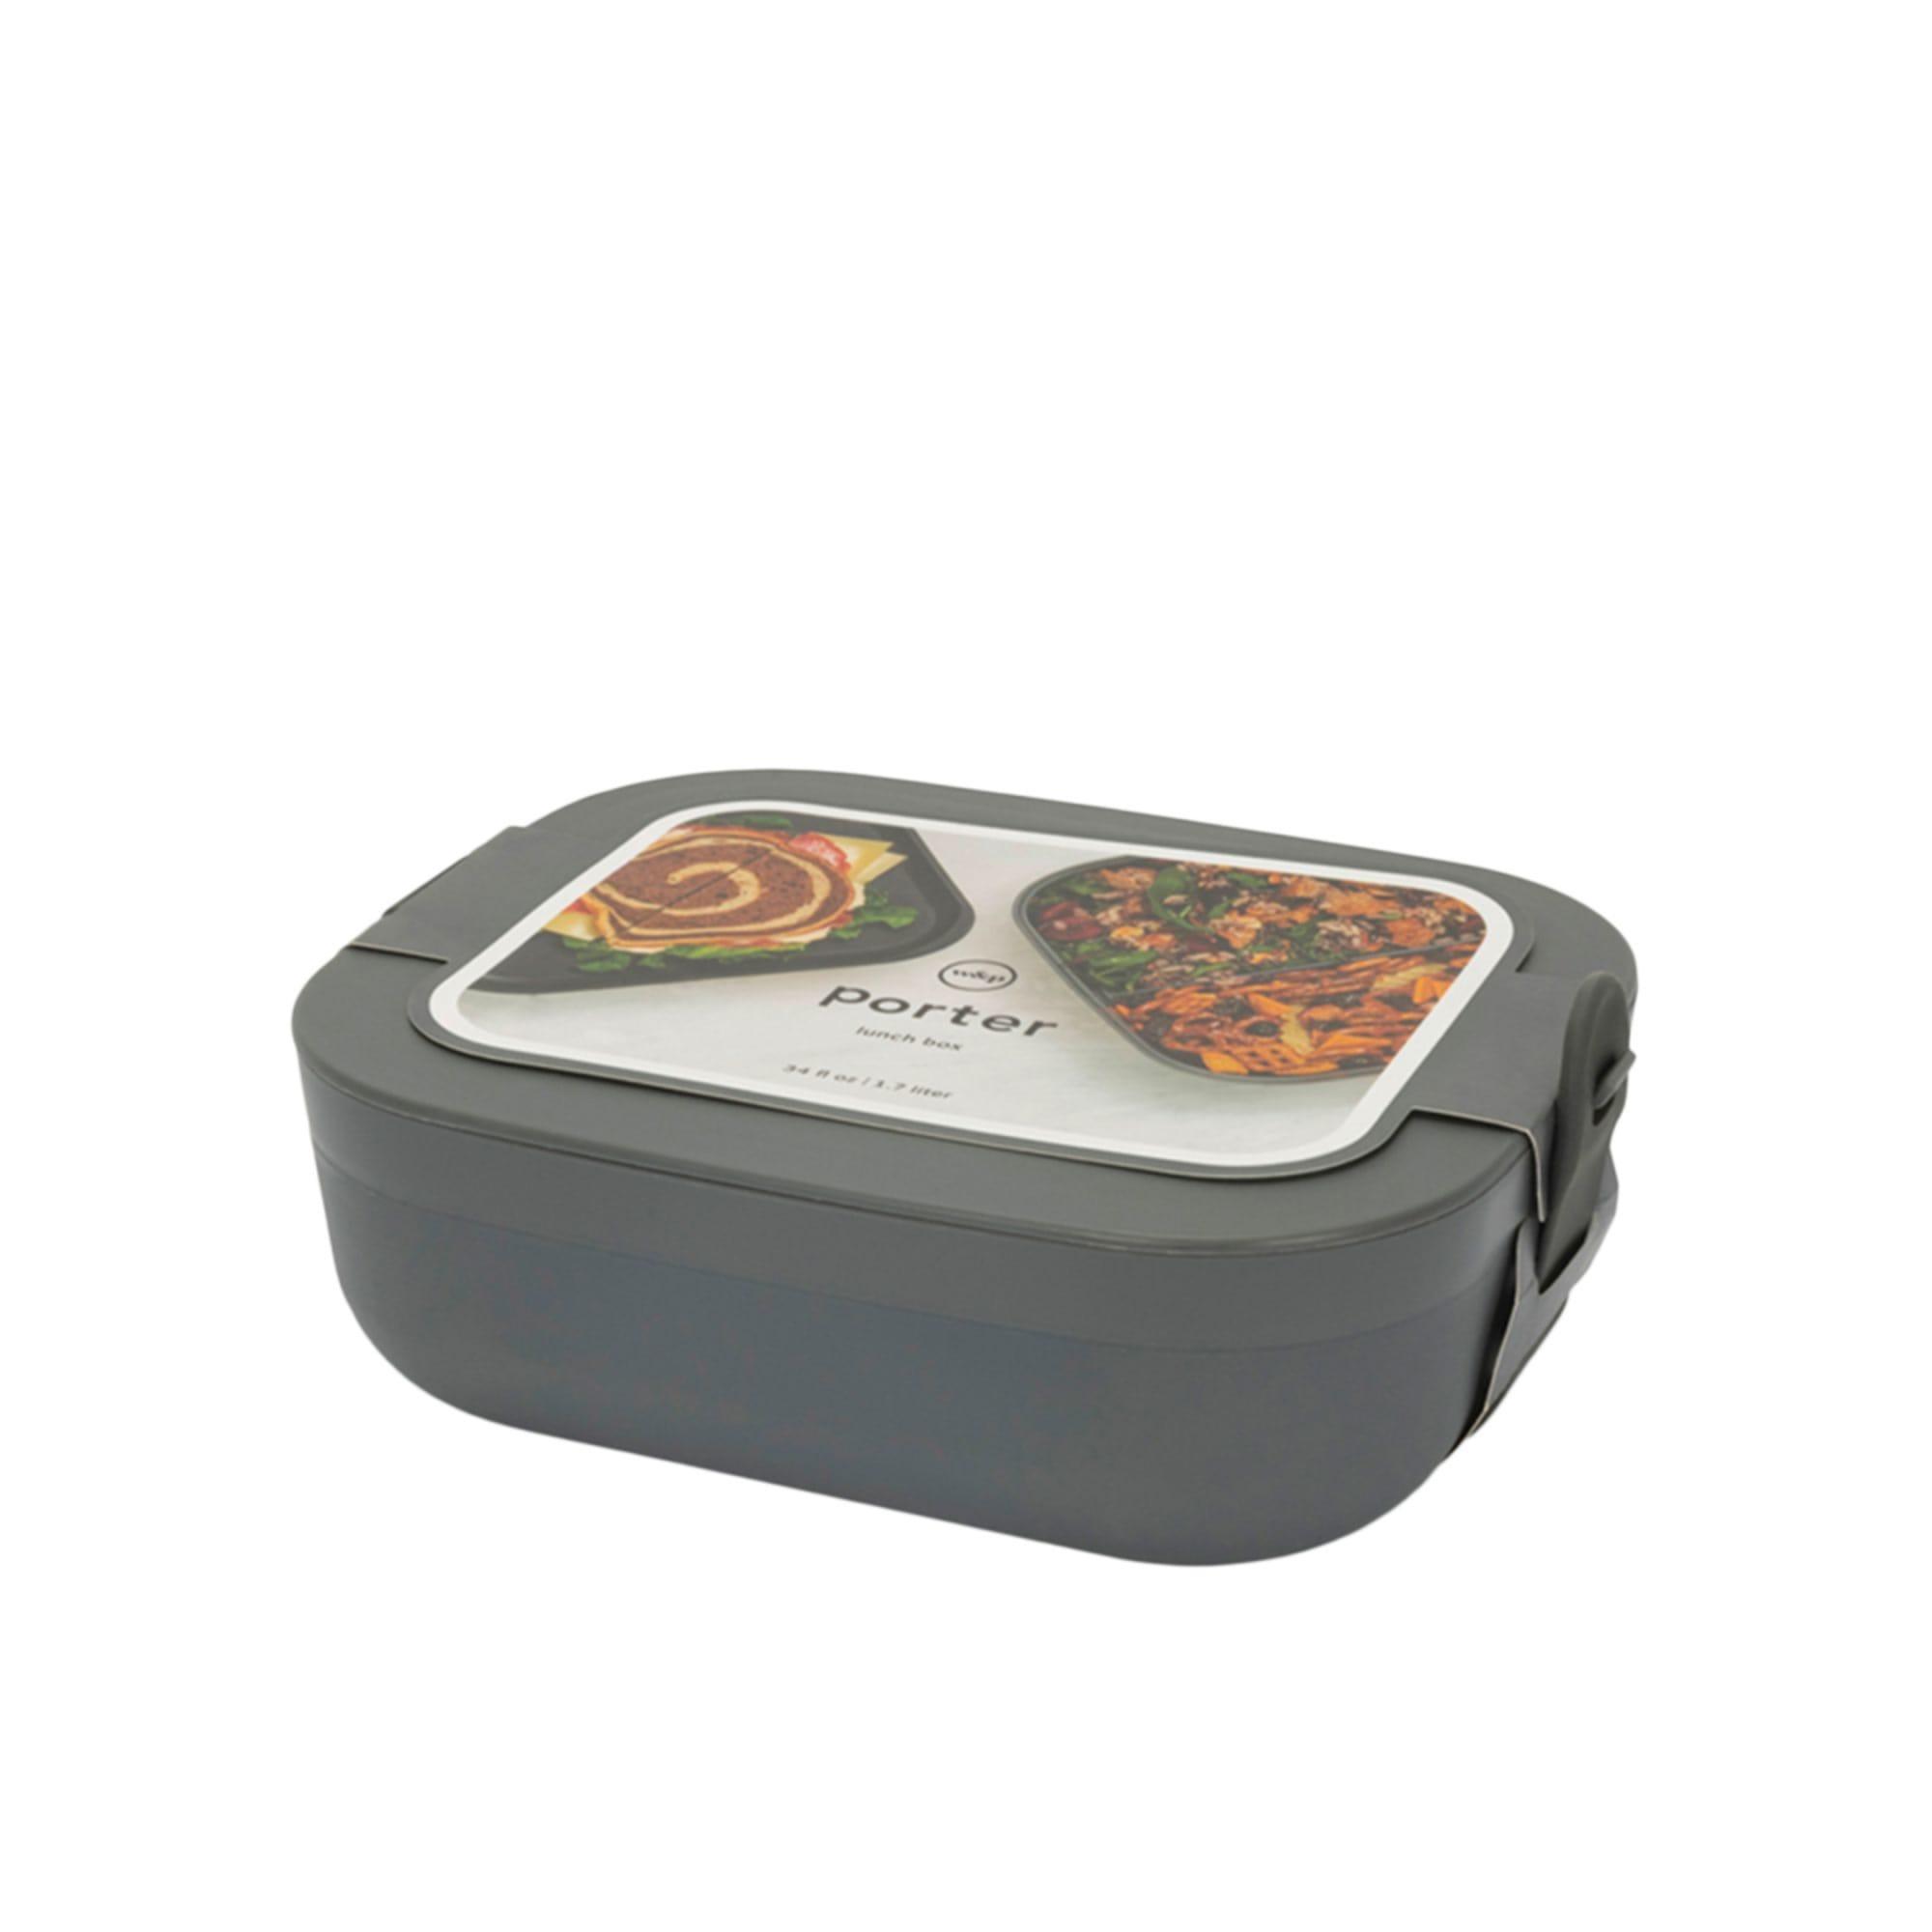 W&P Lunch Box 1.5L Charcoal Image 4